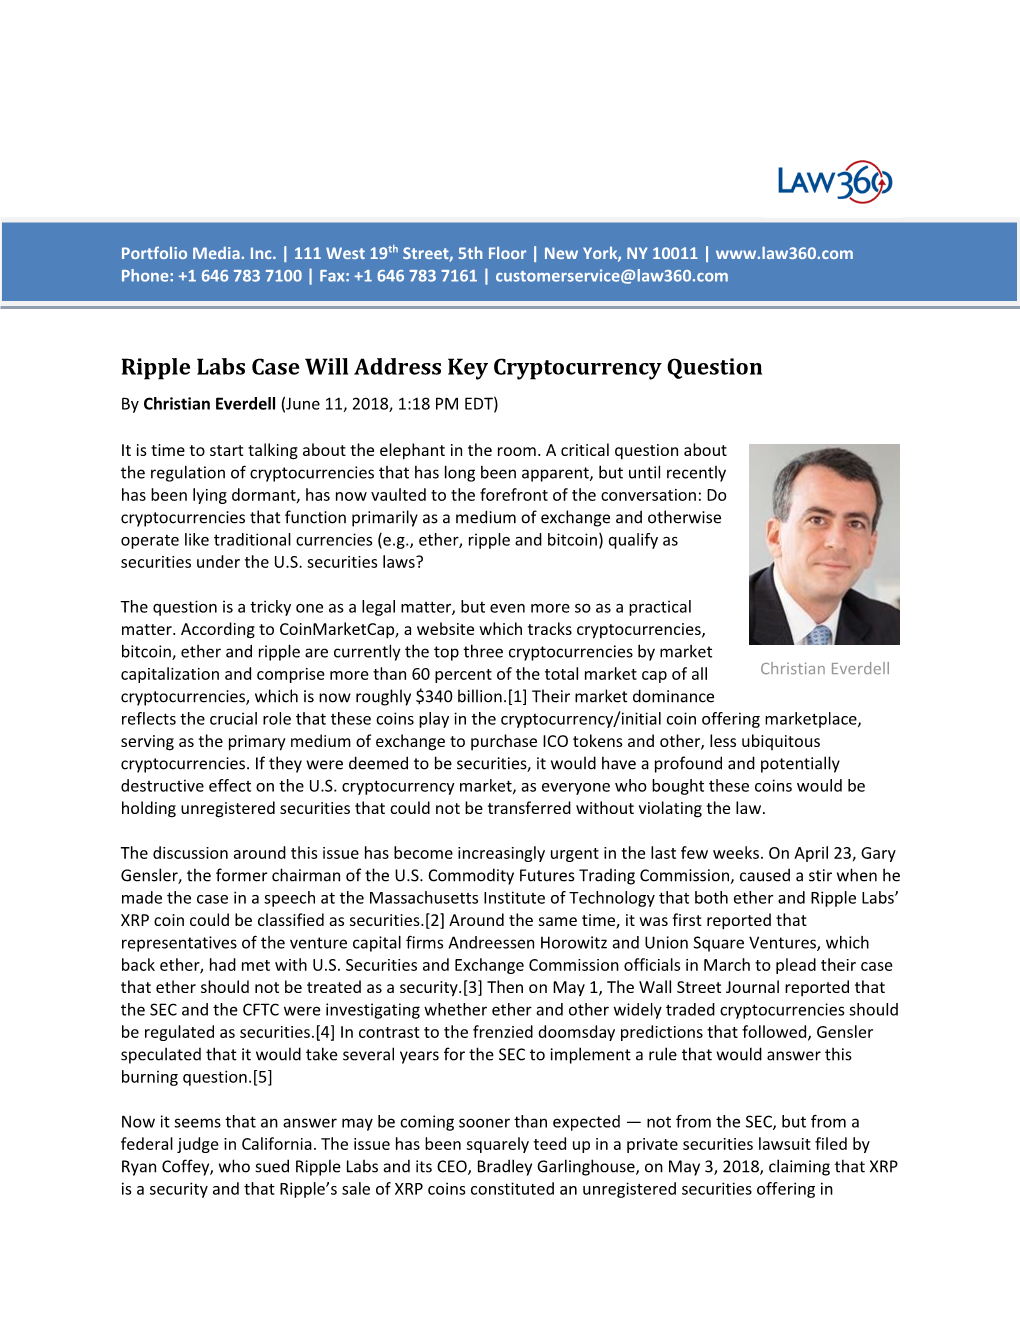 Ripple Labs Case Will Address Key Cryptocurrency Question by Christian Everdell (June 11, 2018, 1:18 PM EDT)